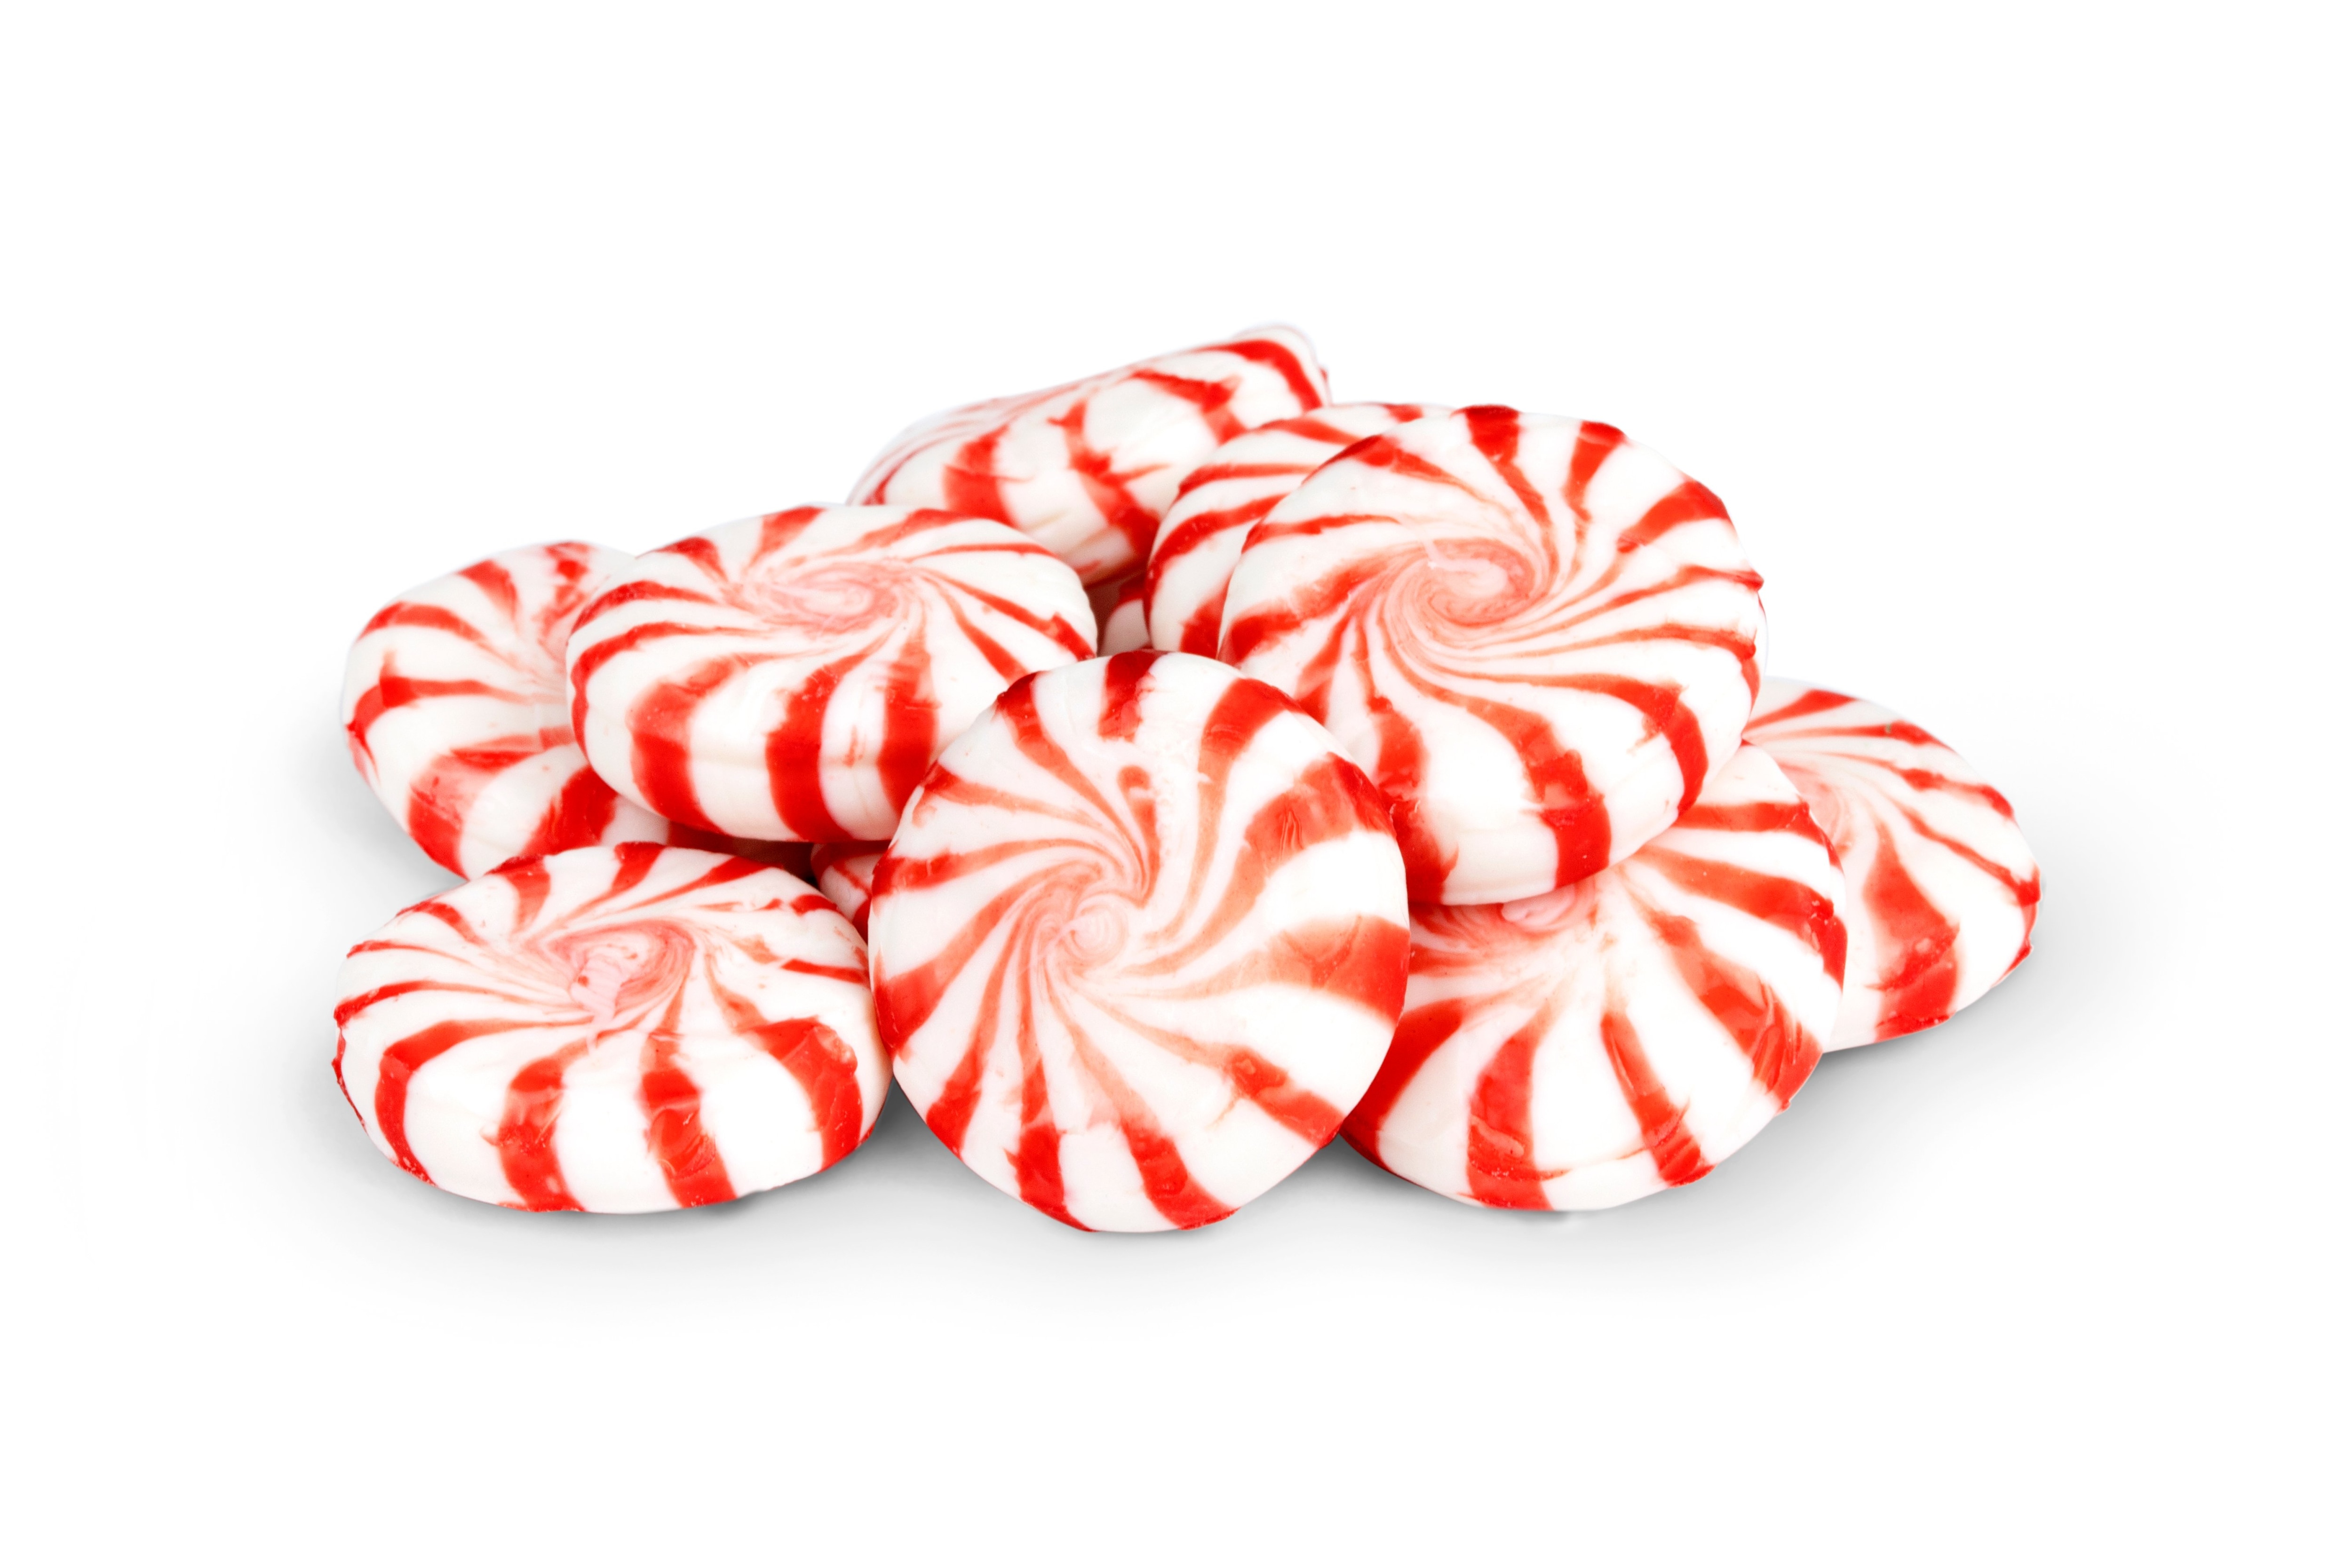 Mint Clipart Peppermint Candy - Christmas Day - 440x440 PNG - Clip Art ...